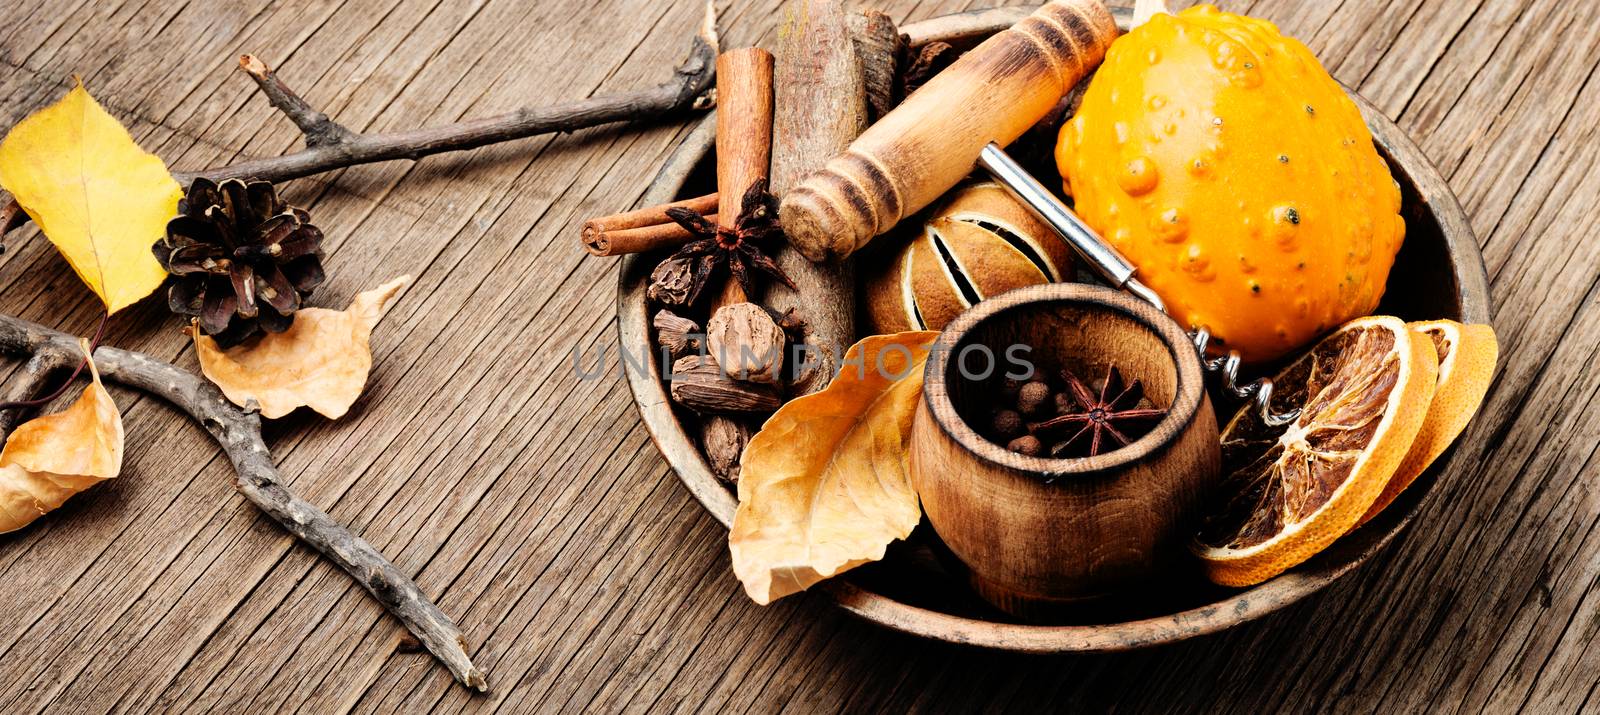 Spice for mulled wine by LMykola